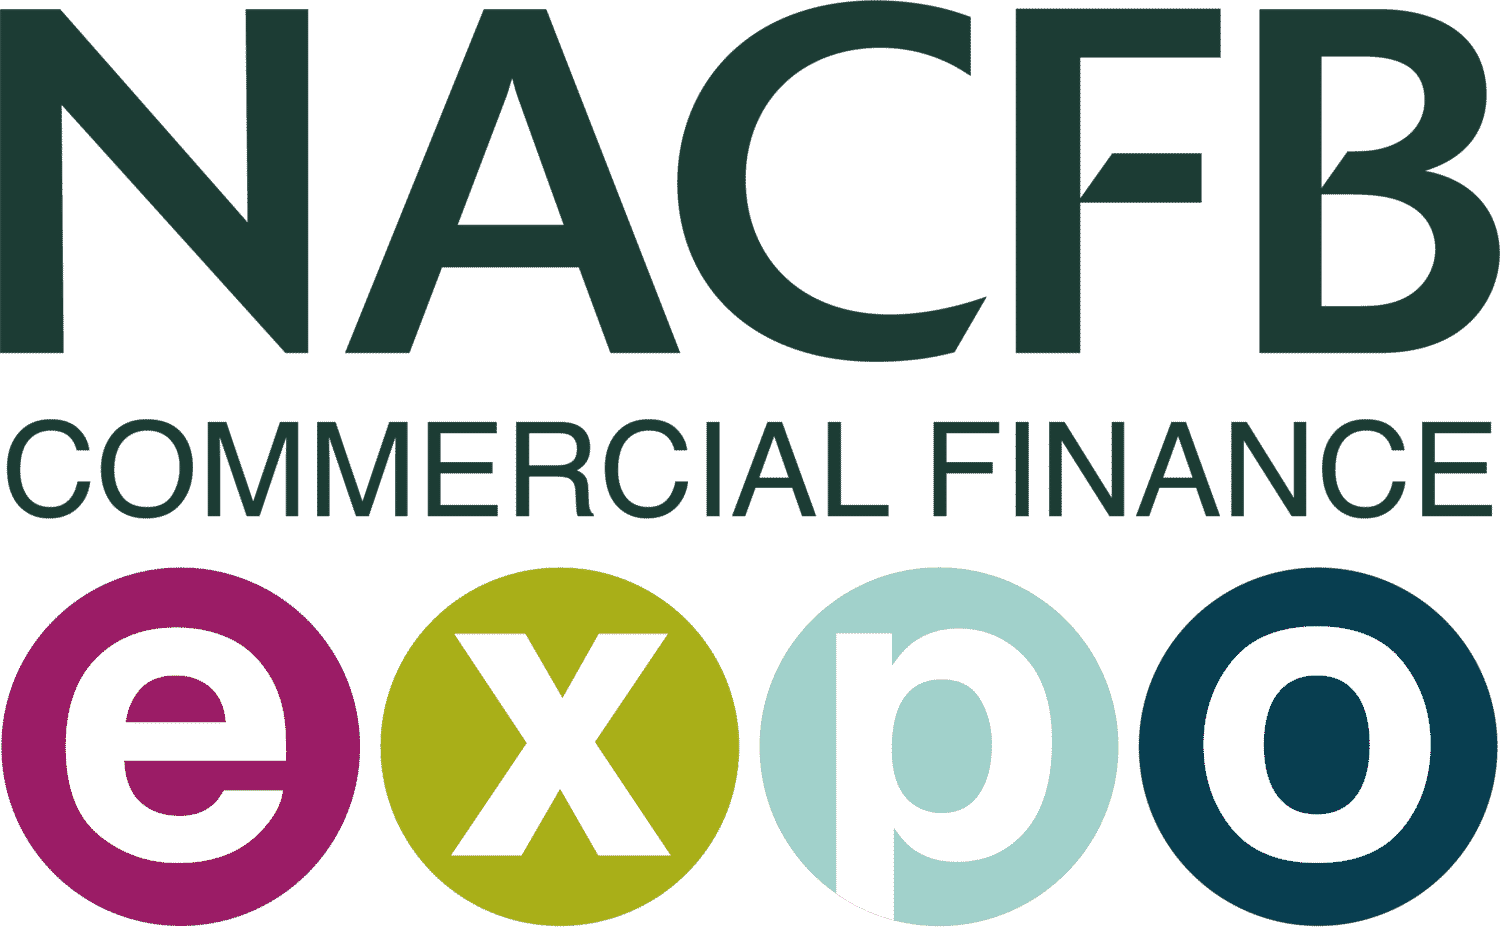 NACFB Commerical Finance Expo logo